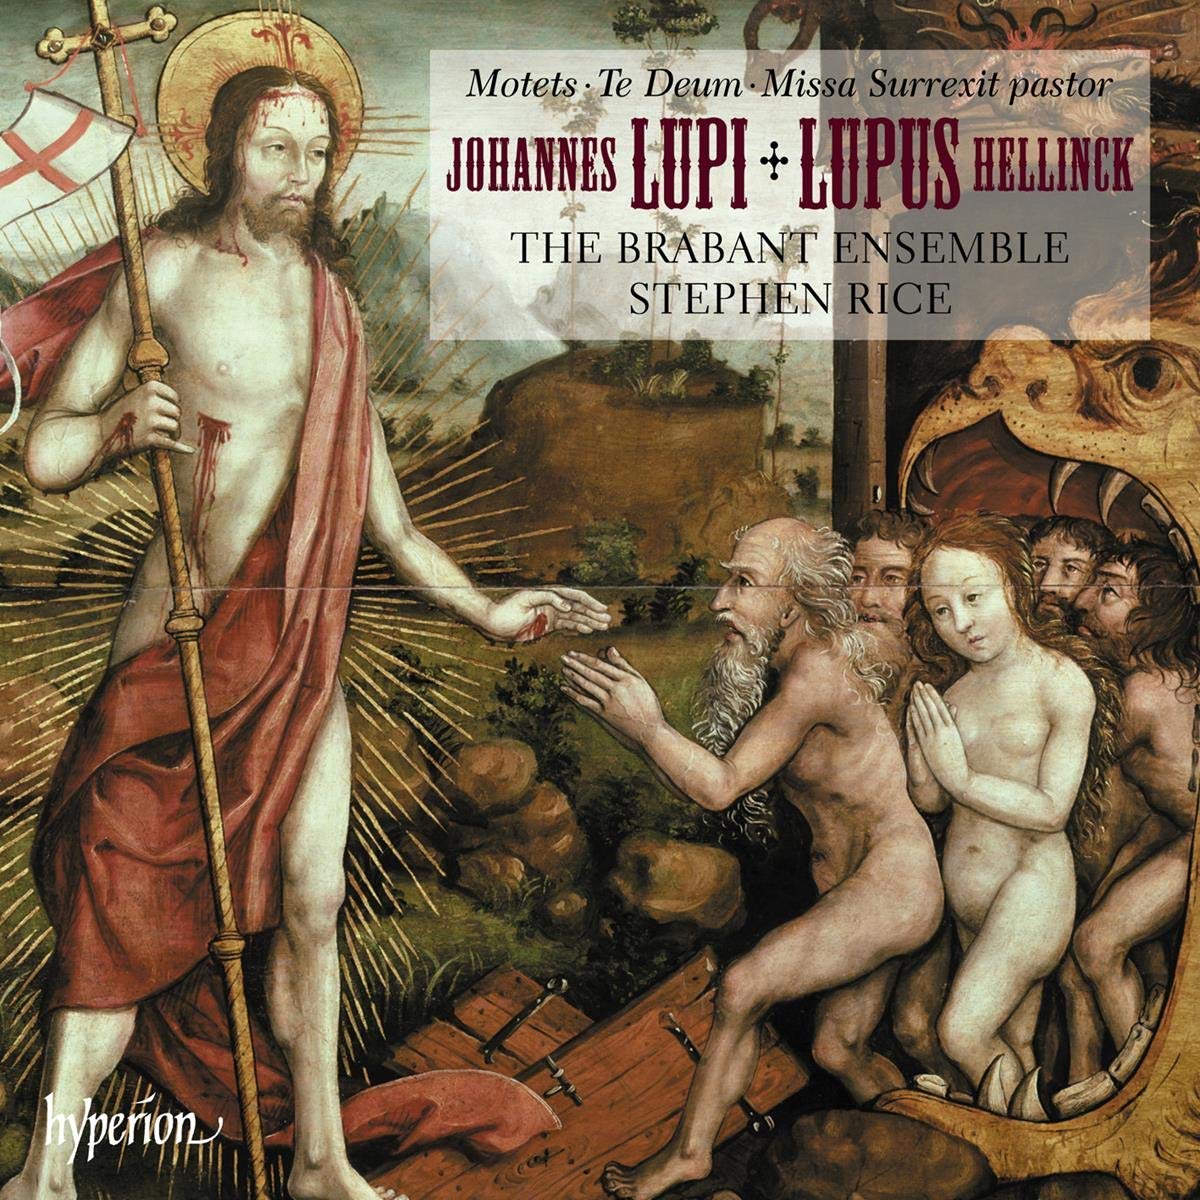 Cover of CD booklet for Hellinck and Lupi